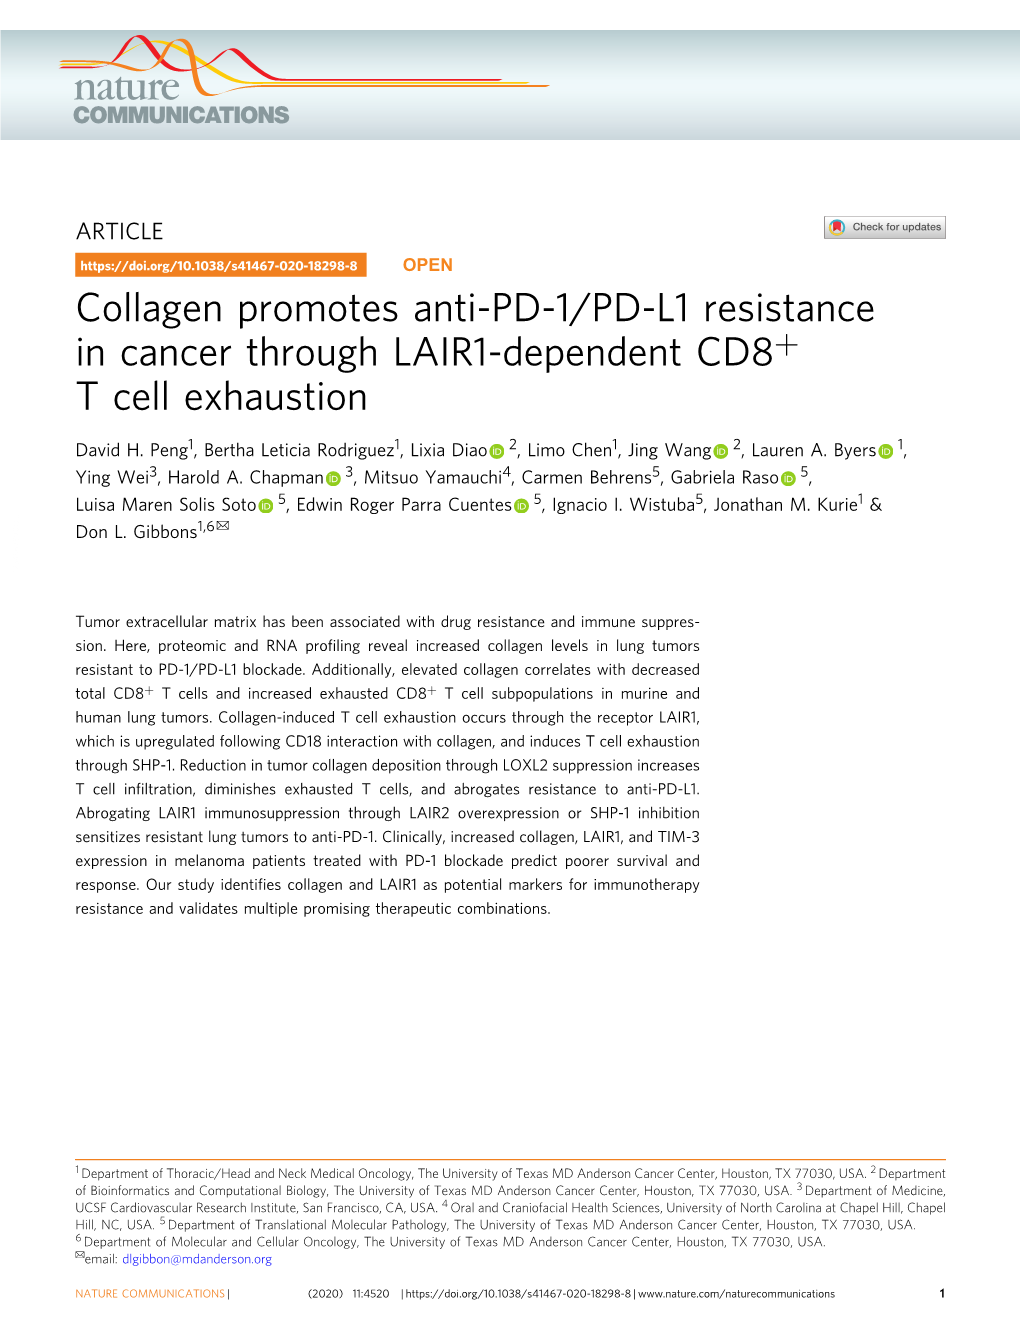 Collagen Promotes Anti-PD-1/PD-L1 Resistance in Cancer Through LAIR1-Dependent CD8+ T Cell Exhaustion